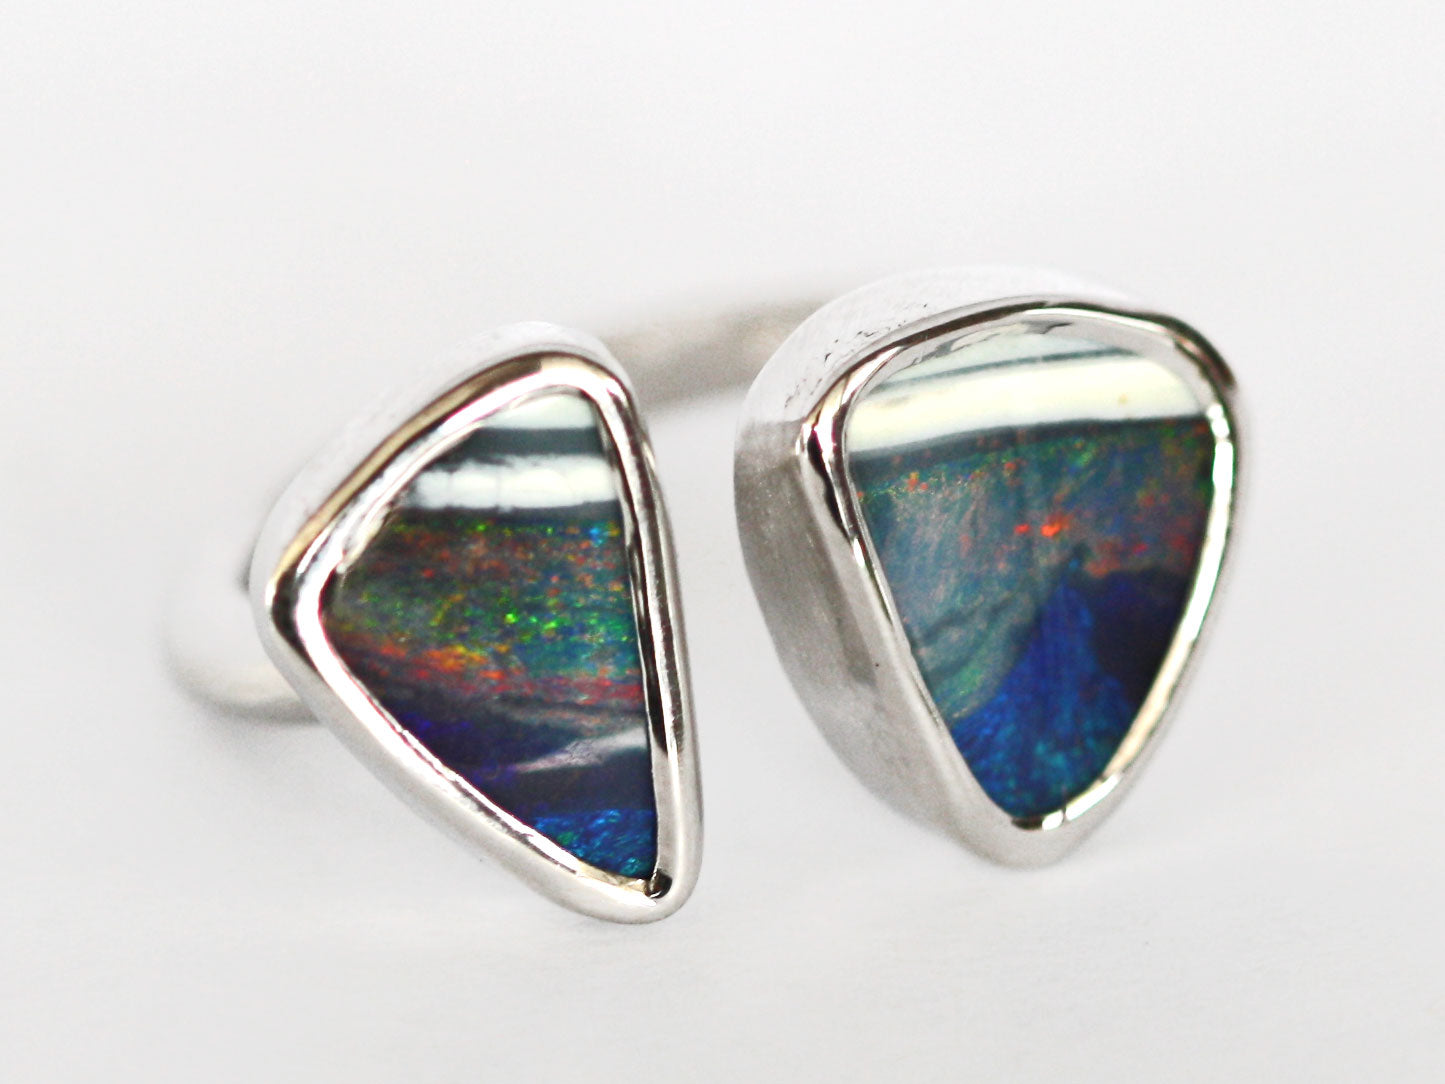 Silver Queensland boulder opal ring. Double Opal set in smooth polished silver. High quality, Australian made by Custom Jewellery Co in our Brisbane studio. Hand crafted using local and ethical materials. Opal is blue with strip of white, has reds, greens and purples shining in the stones. Each stone is a triangle shape